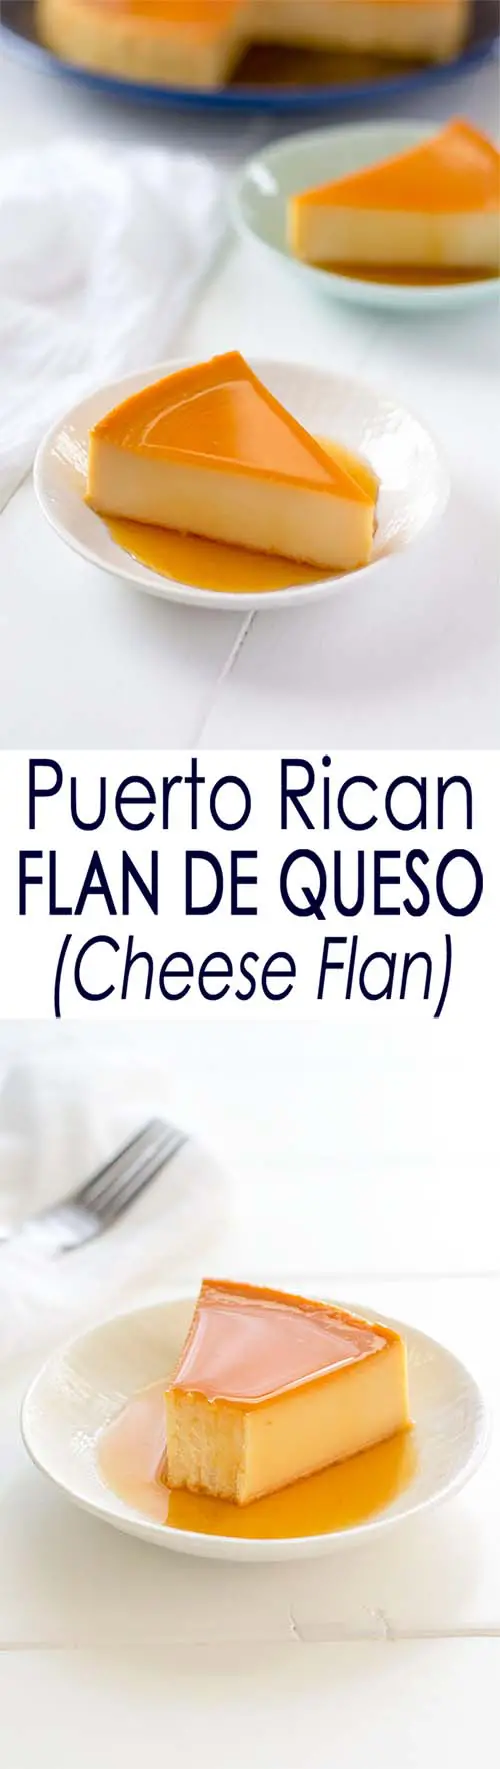 Puerto Rican Flan de Queso: a cheesecake baked custard dessert with caramel sauce that's not too sweet thanks to cream cheese! | Kitchen Gidget